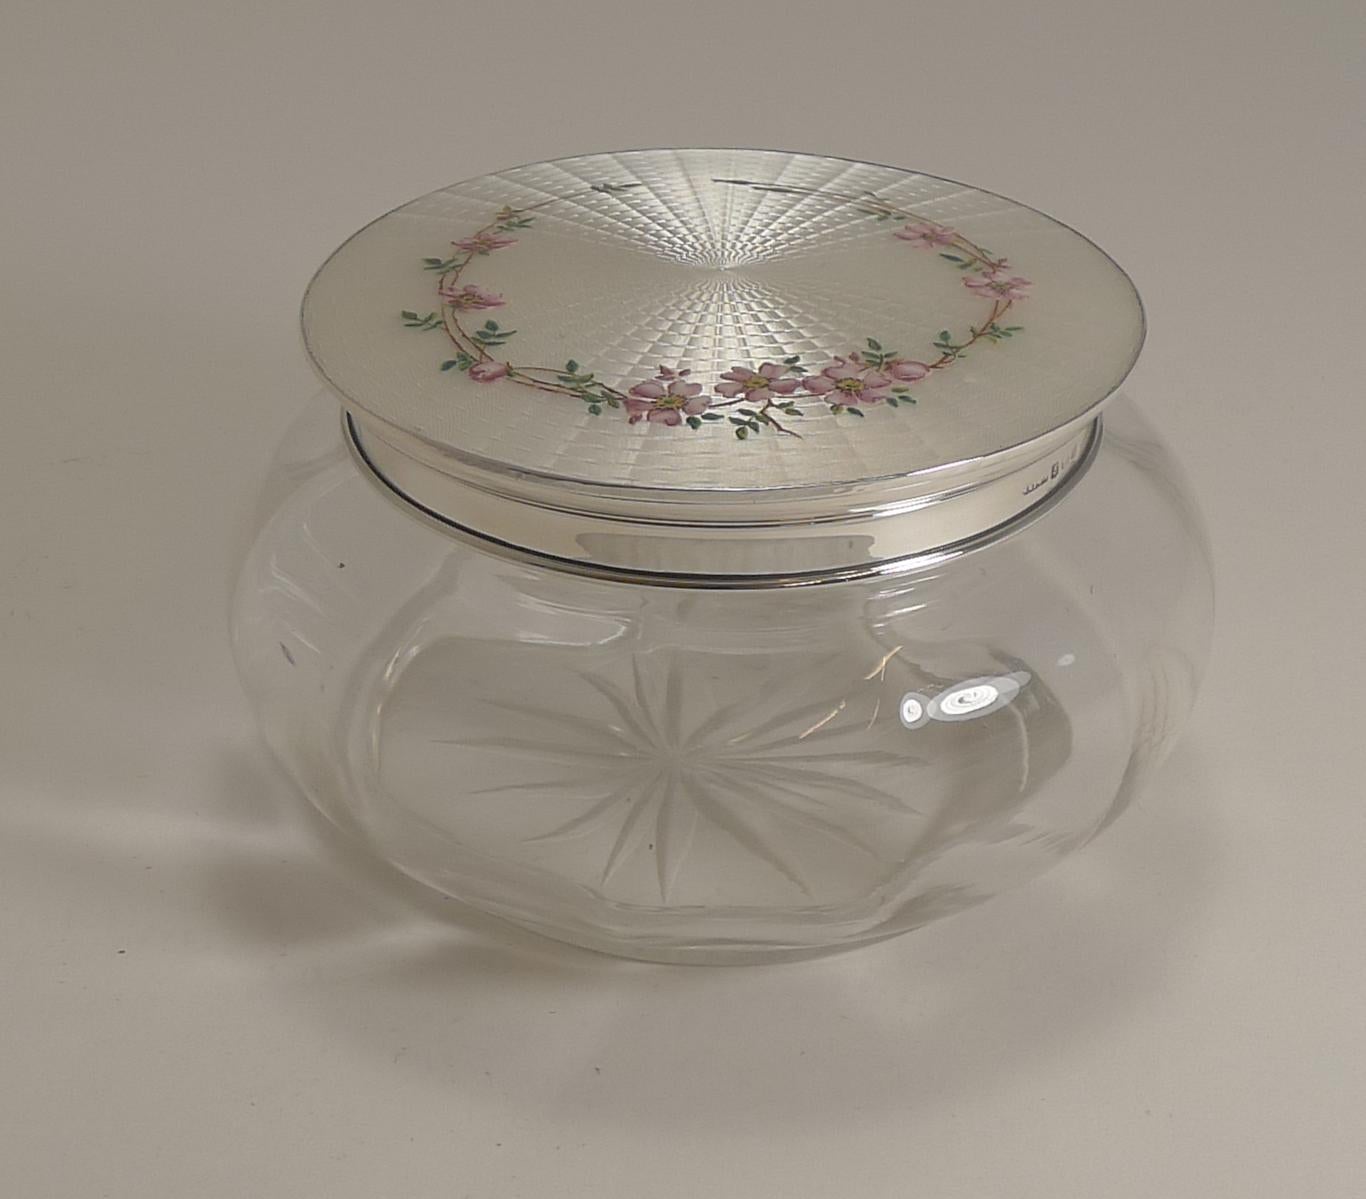 A magnificent and very large powder bowl or box, a really showy example with the most exquisite guilloche enamel lid.

The lid is made from English sterling silver with a hallmark (rubbed) for Birmingham 1924, making this nearly 100 years old. The